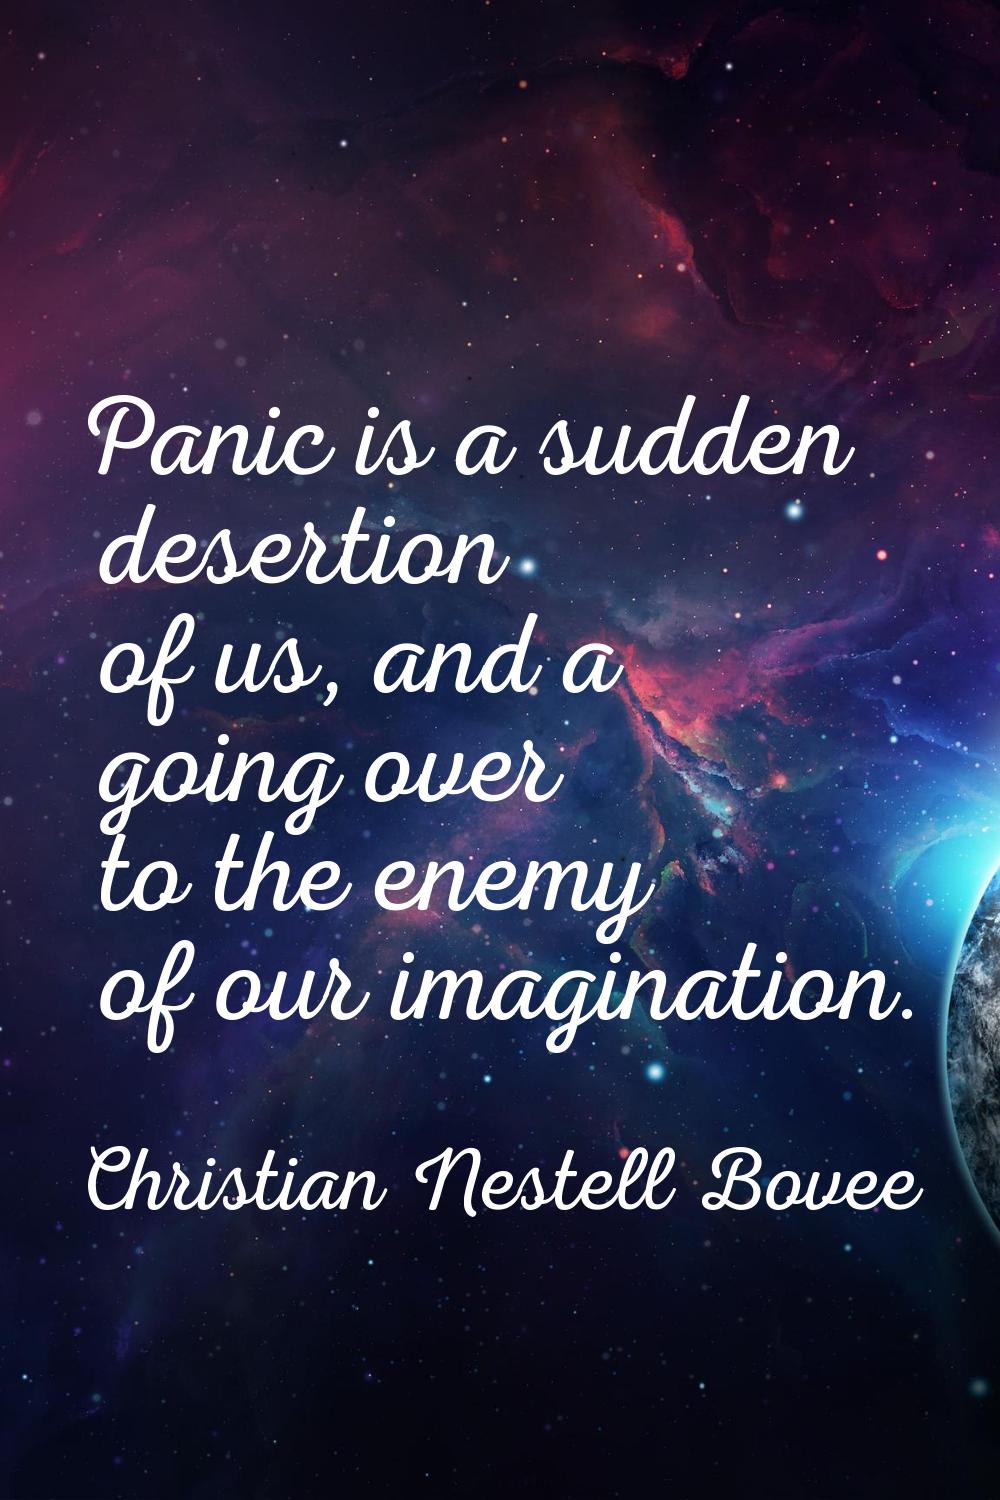 Panic is a sudden desertion of us, and a going over to the enemy of our imagination.